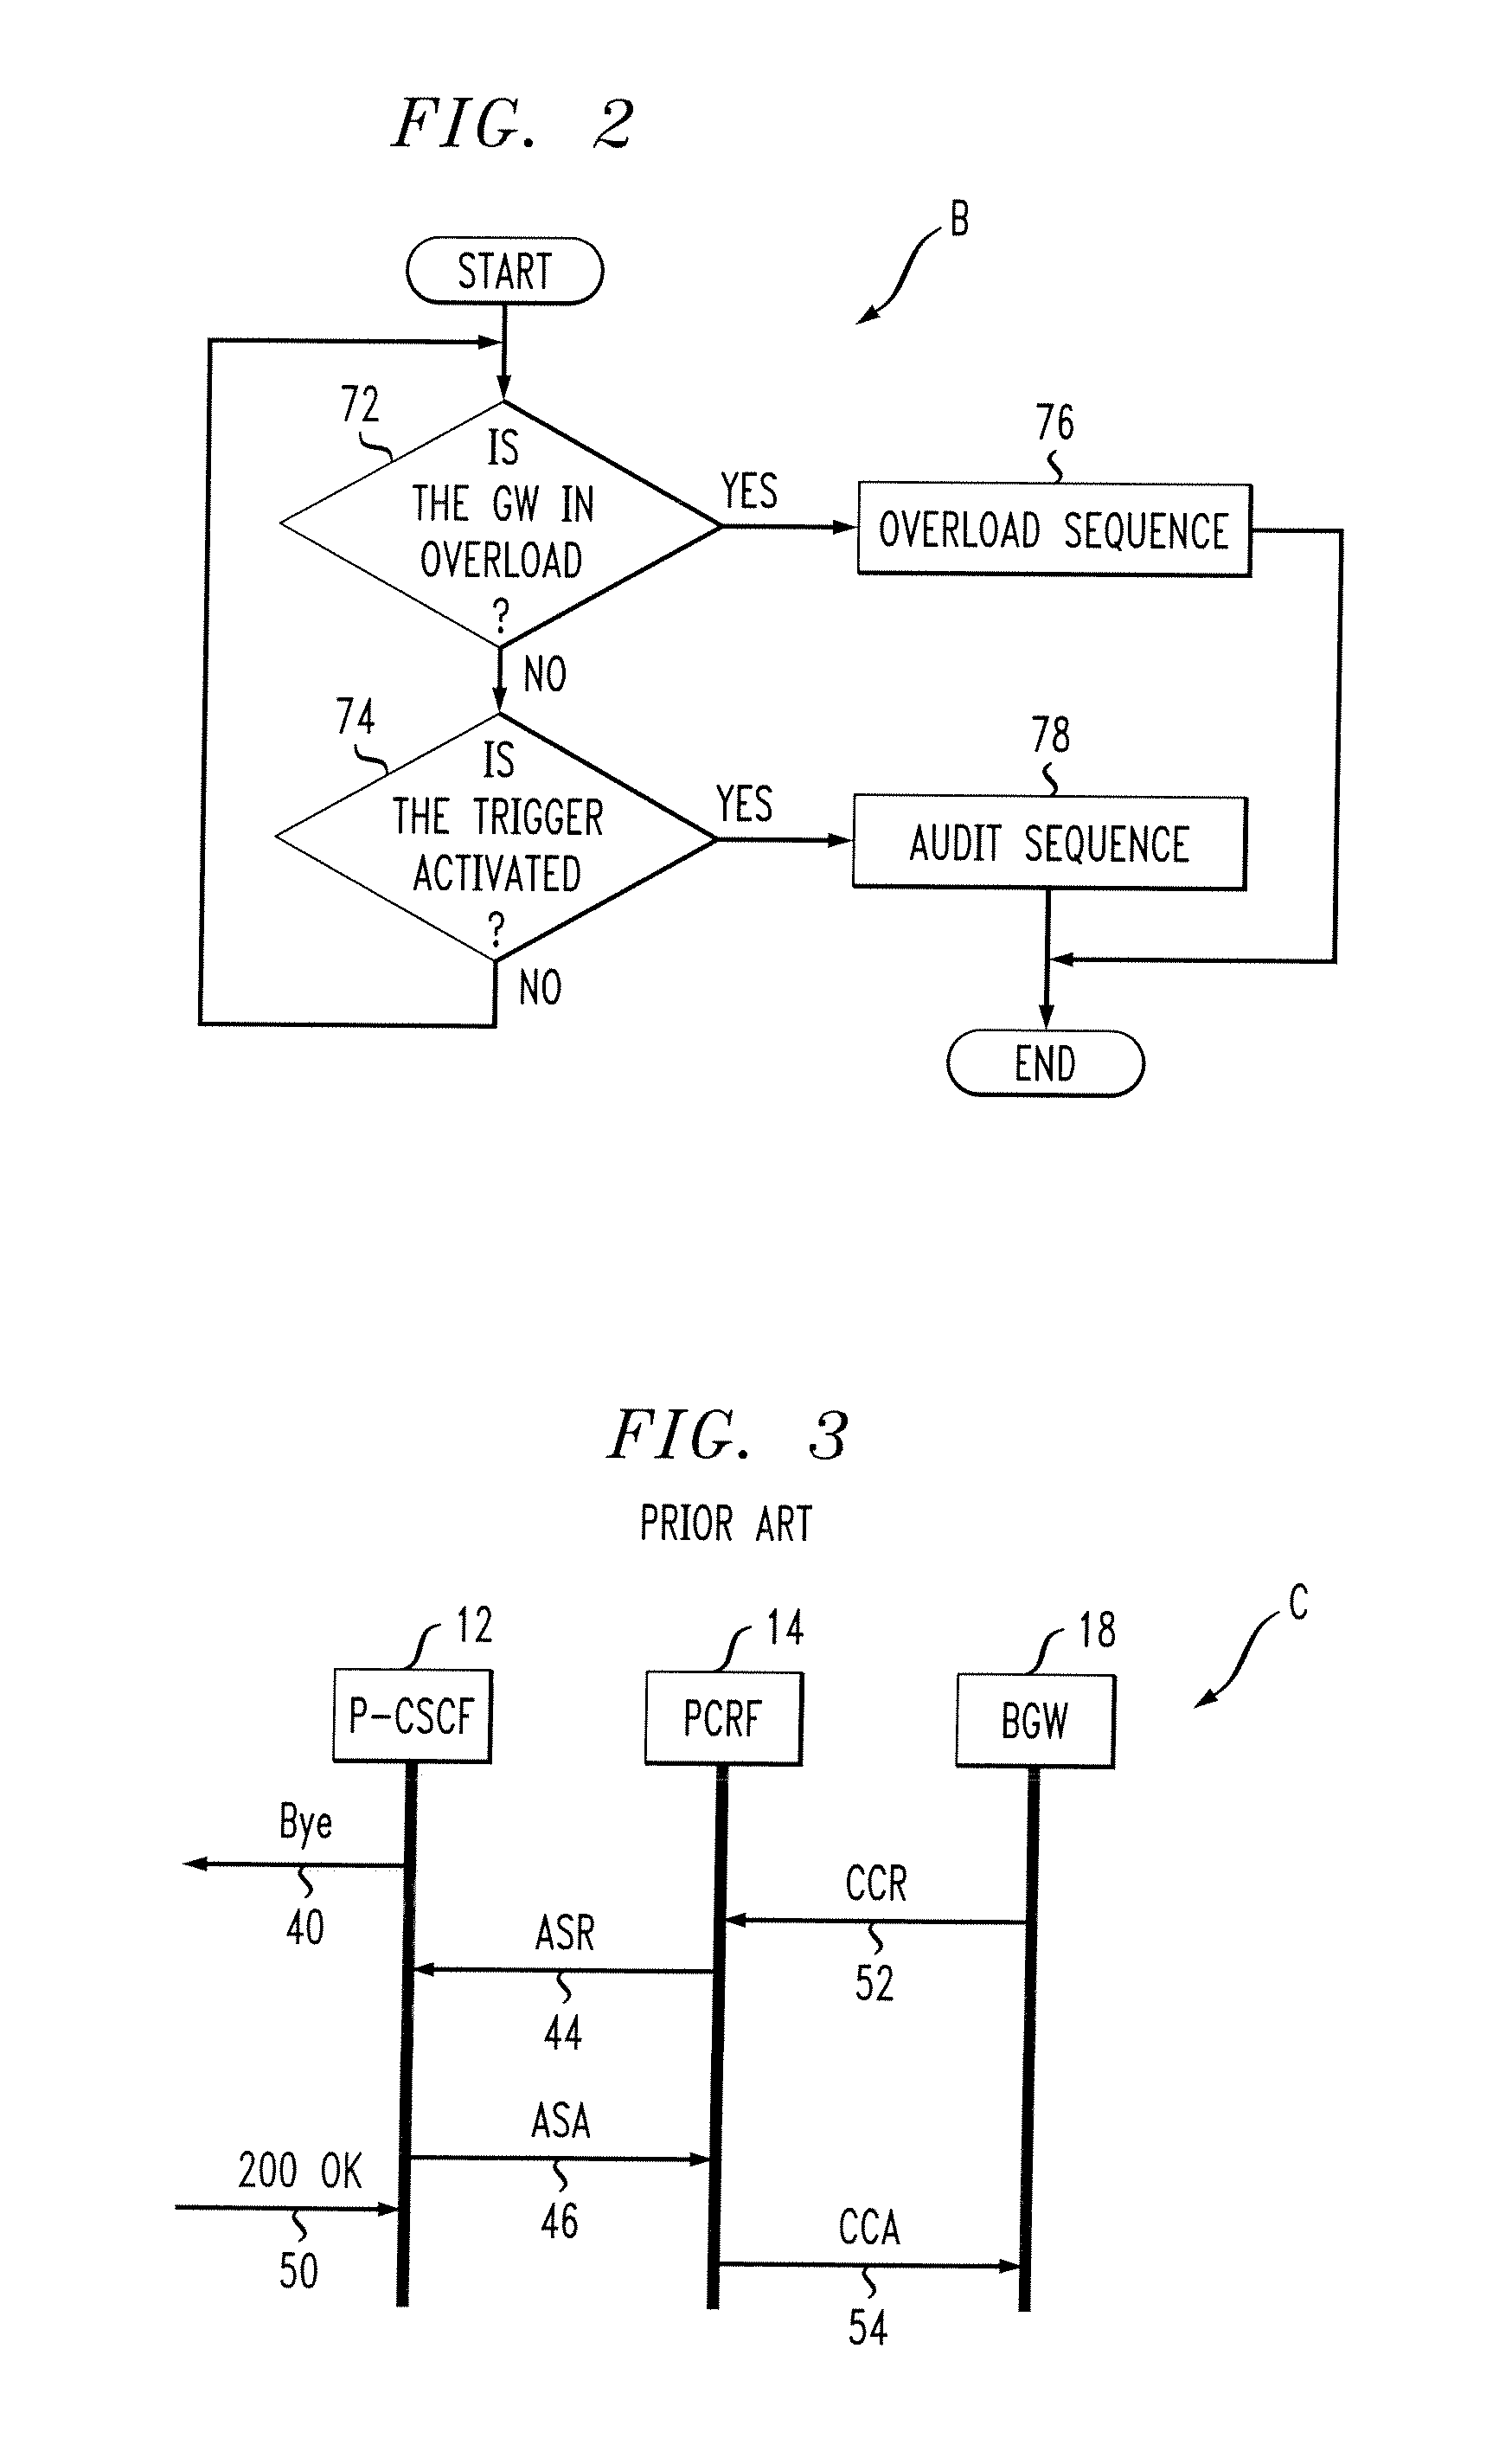 Method and apparatus for overload control and audit in a resource control and management system